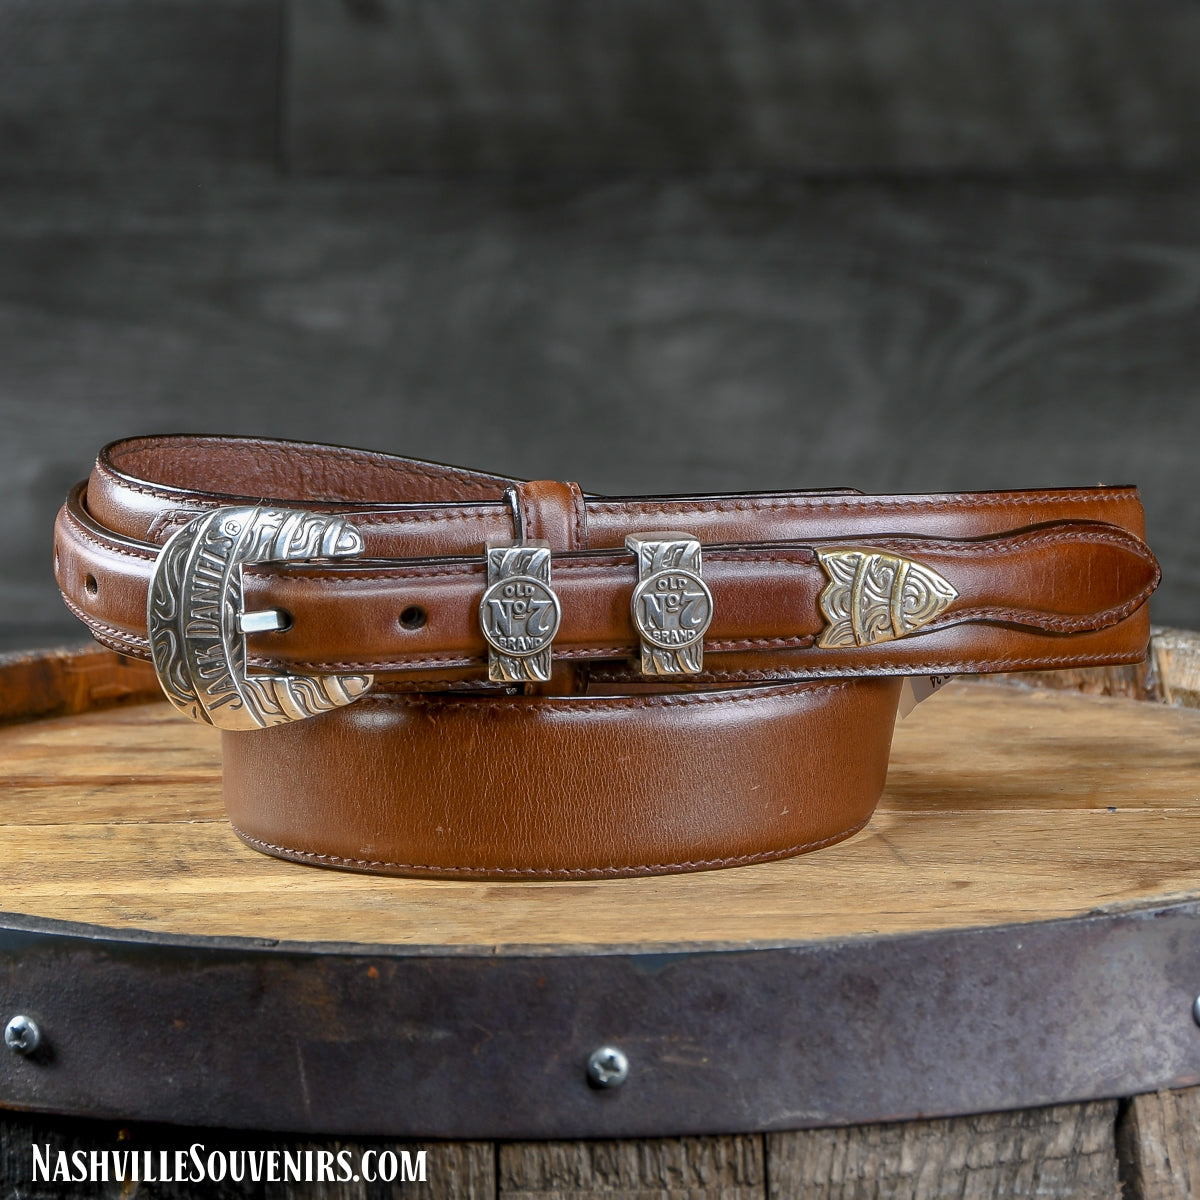 Officially licensed Jack Daniels Belt with Old No.7 Silver Medallions and Cowhide Belt. Get yours today with FREE SHIPPING on all US orders over $75!